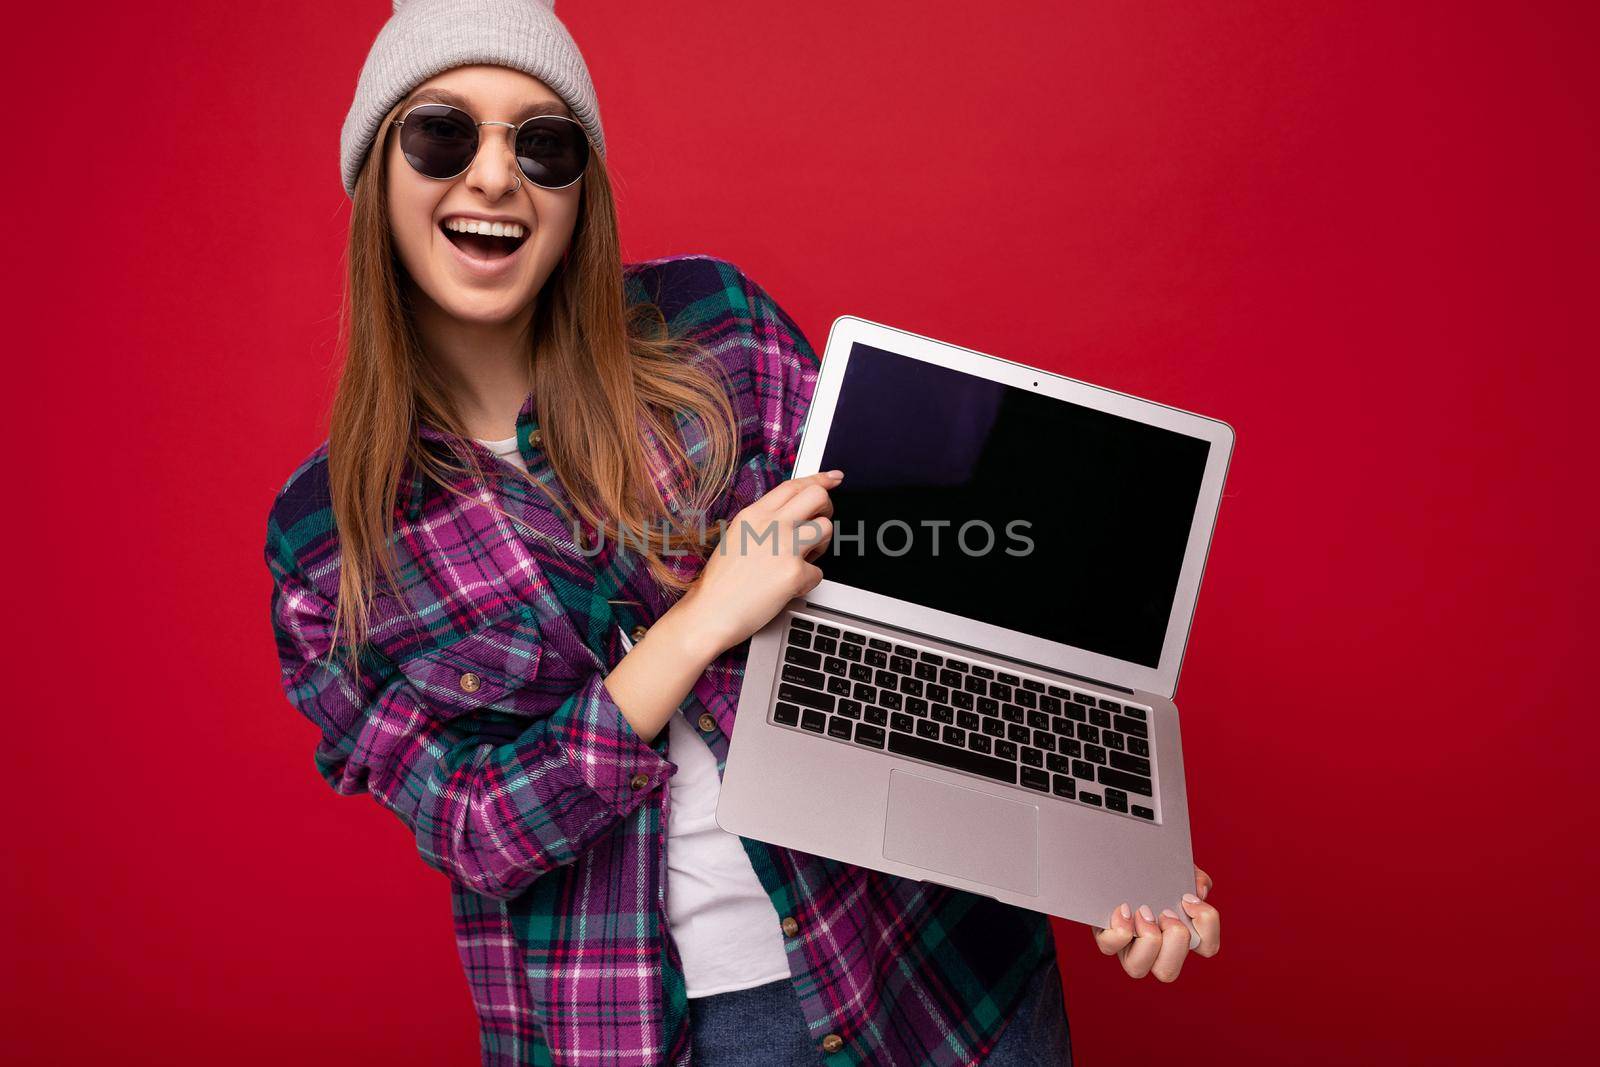 Photo shot of amazing funny happy beautiful smiling dark blond young woman holding computer laptop with empty monitor screen with mock up and copy space wearing sun glasses hat and colourful shirt looking at camera isolated over red wall background.